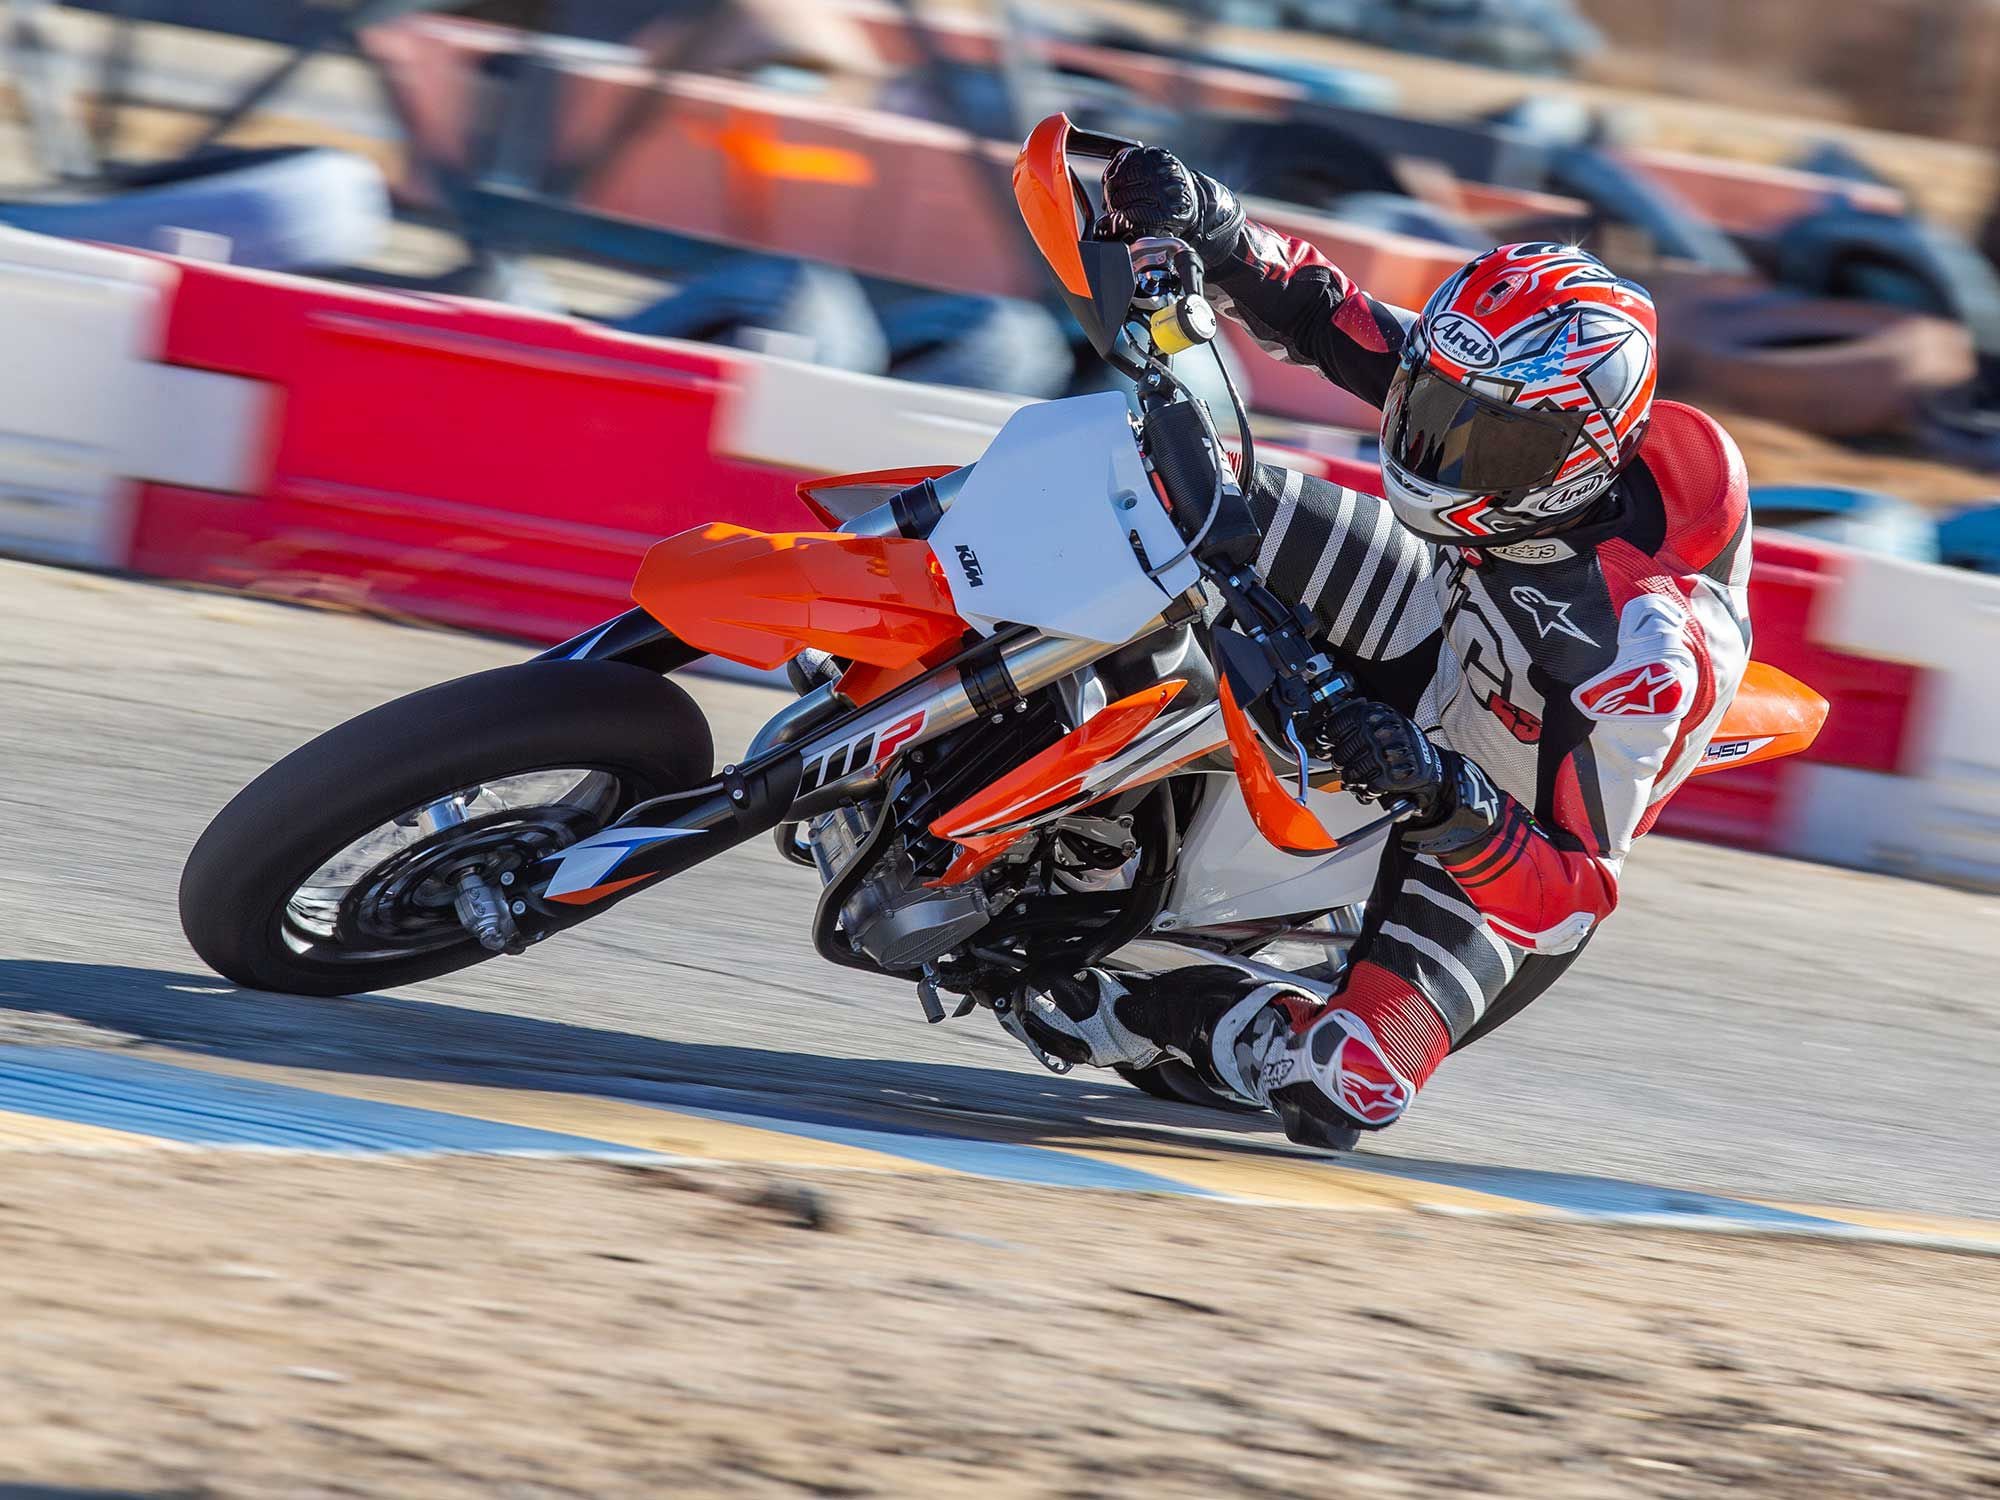 The KTM 450 SMR is a menace at the kart track, shredding tight layouts with ease.